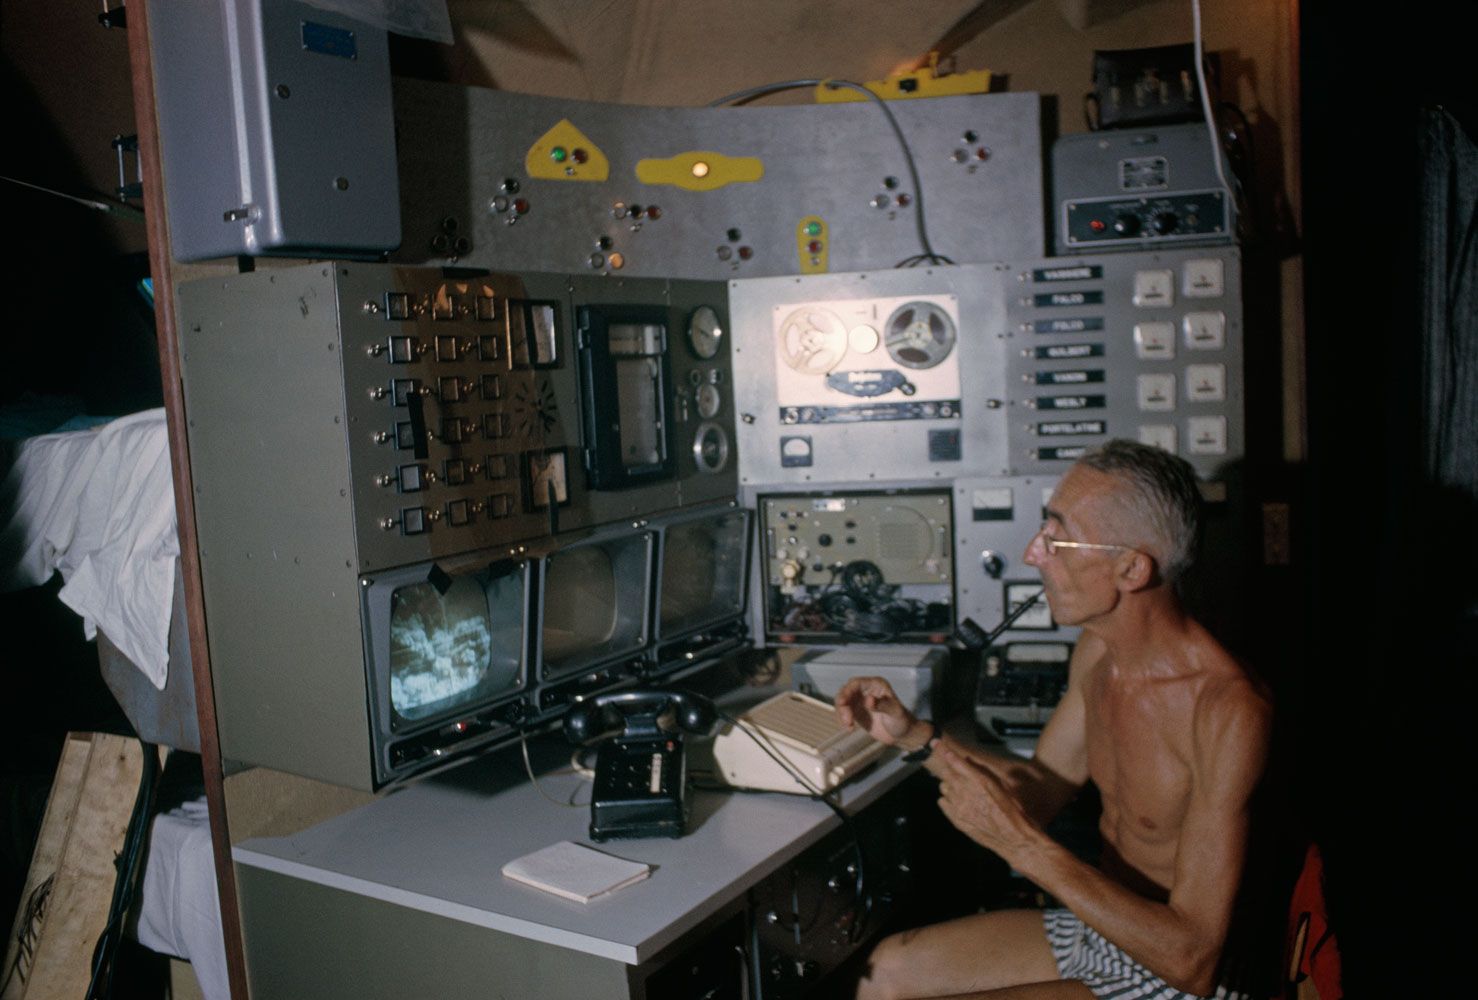 Jacques Cousteau works at an audio-visual machine during the Conshelf II Expedition.